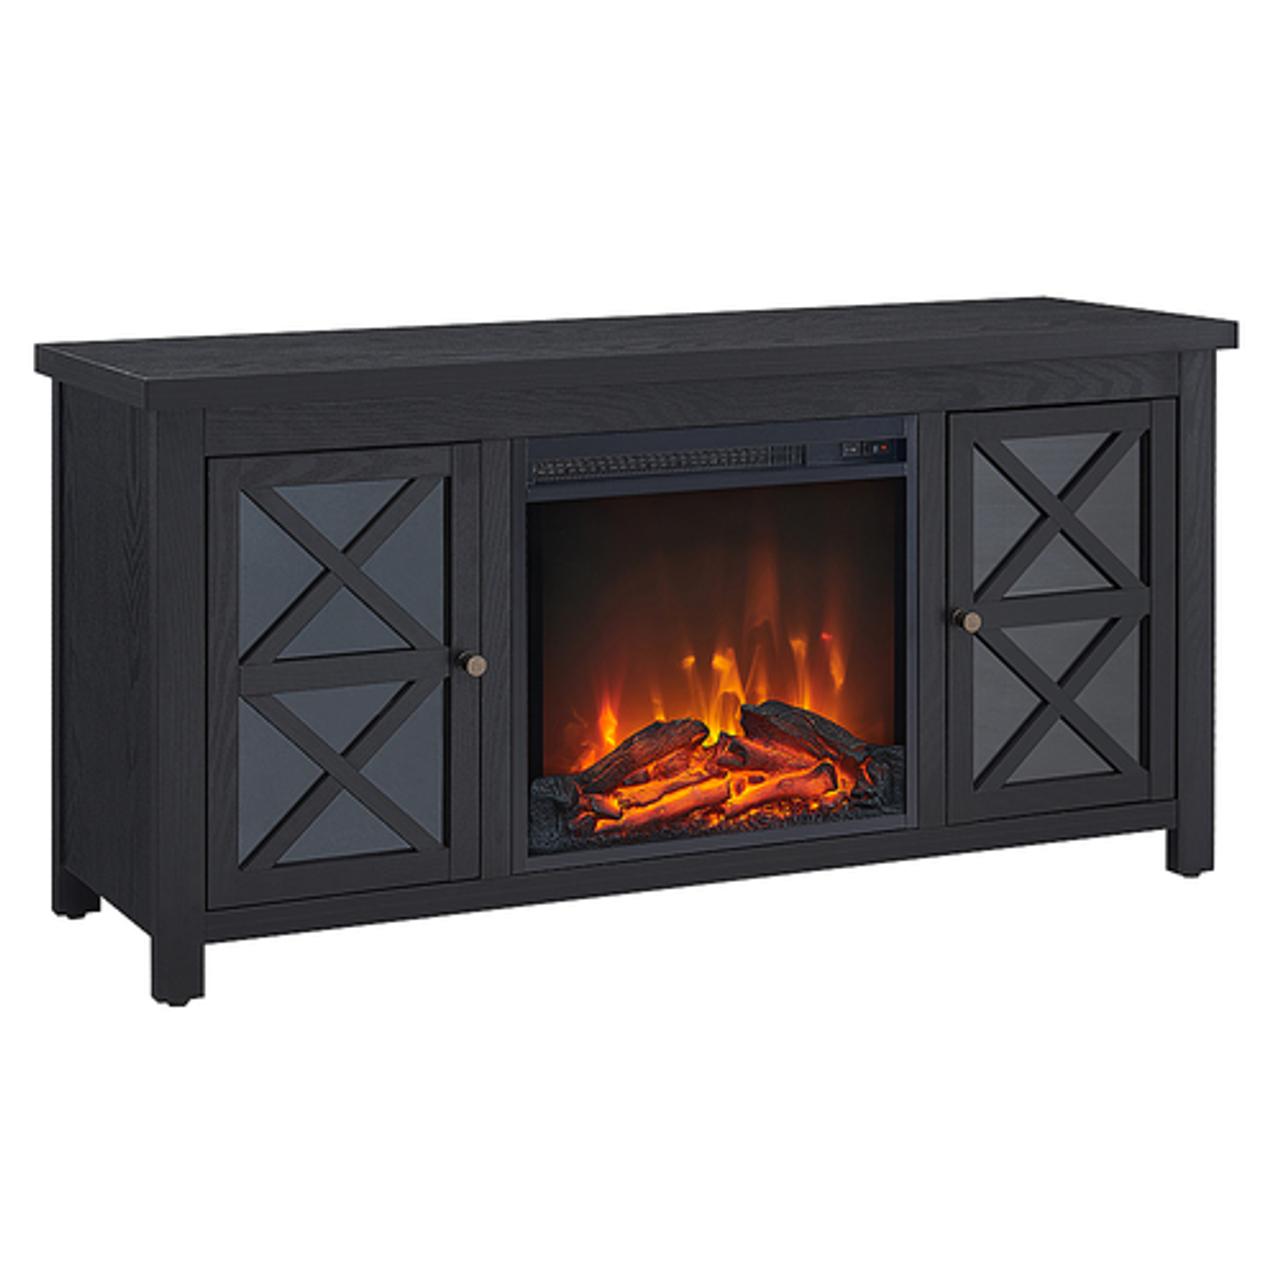 Camden&Wells - Colton 47.75" TV Stand with Log Fireplace - Blackened Bronze